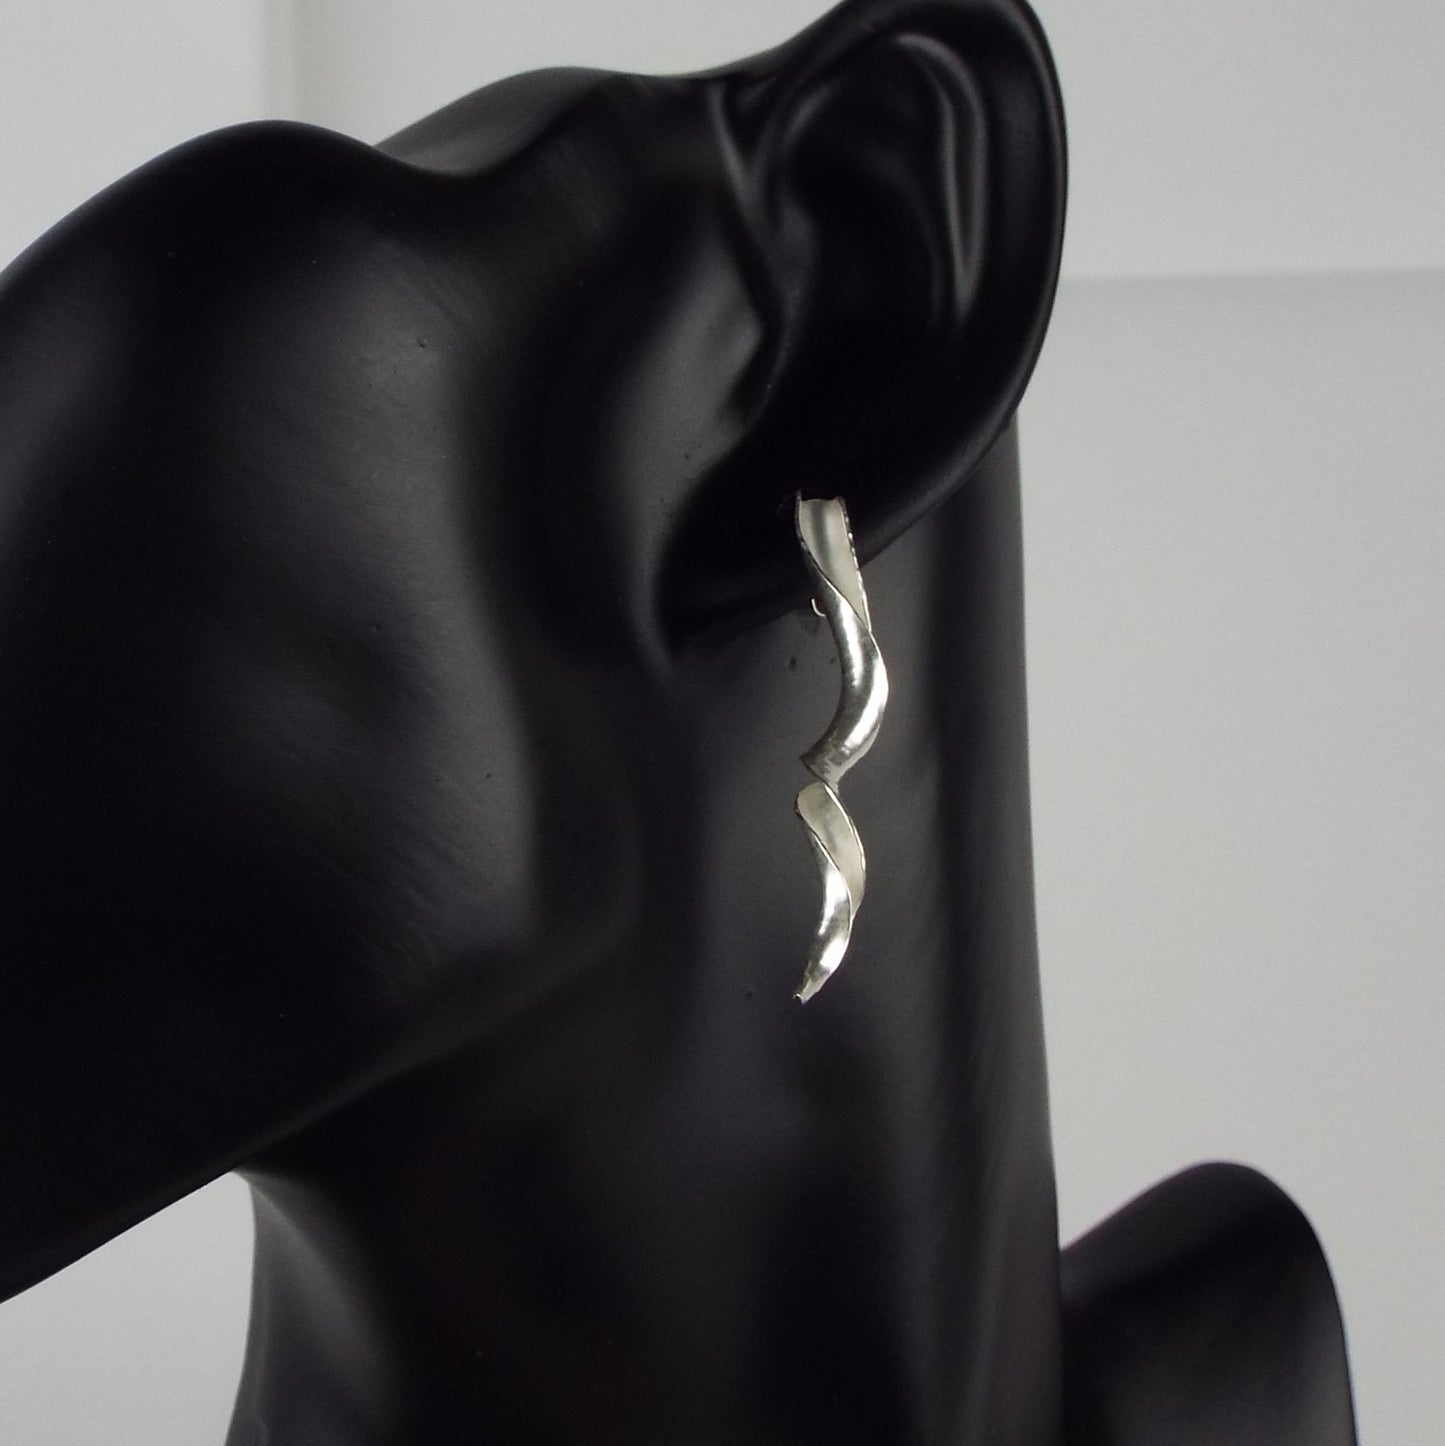 The silver variant of the earrings in wear on a mannequin.